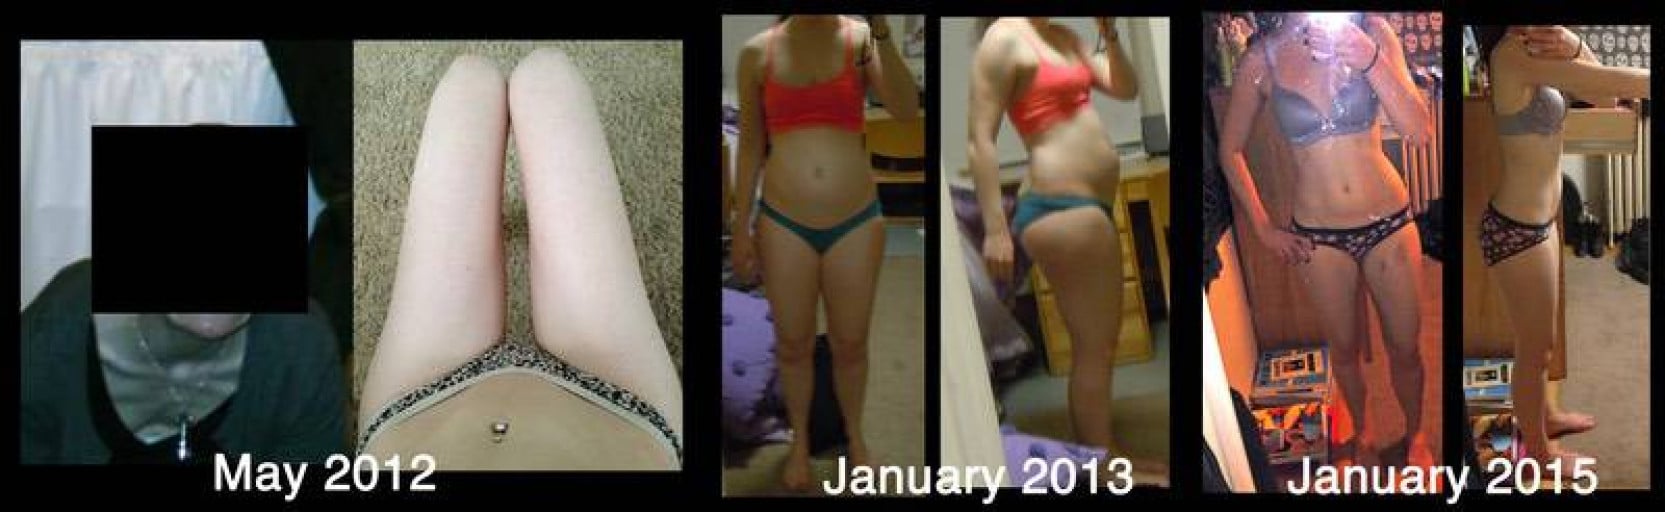 A before and after photo of a 5'4" female showing a weight reduction from 145 pounds to 120 pounds. A total loss of 25 pounds.